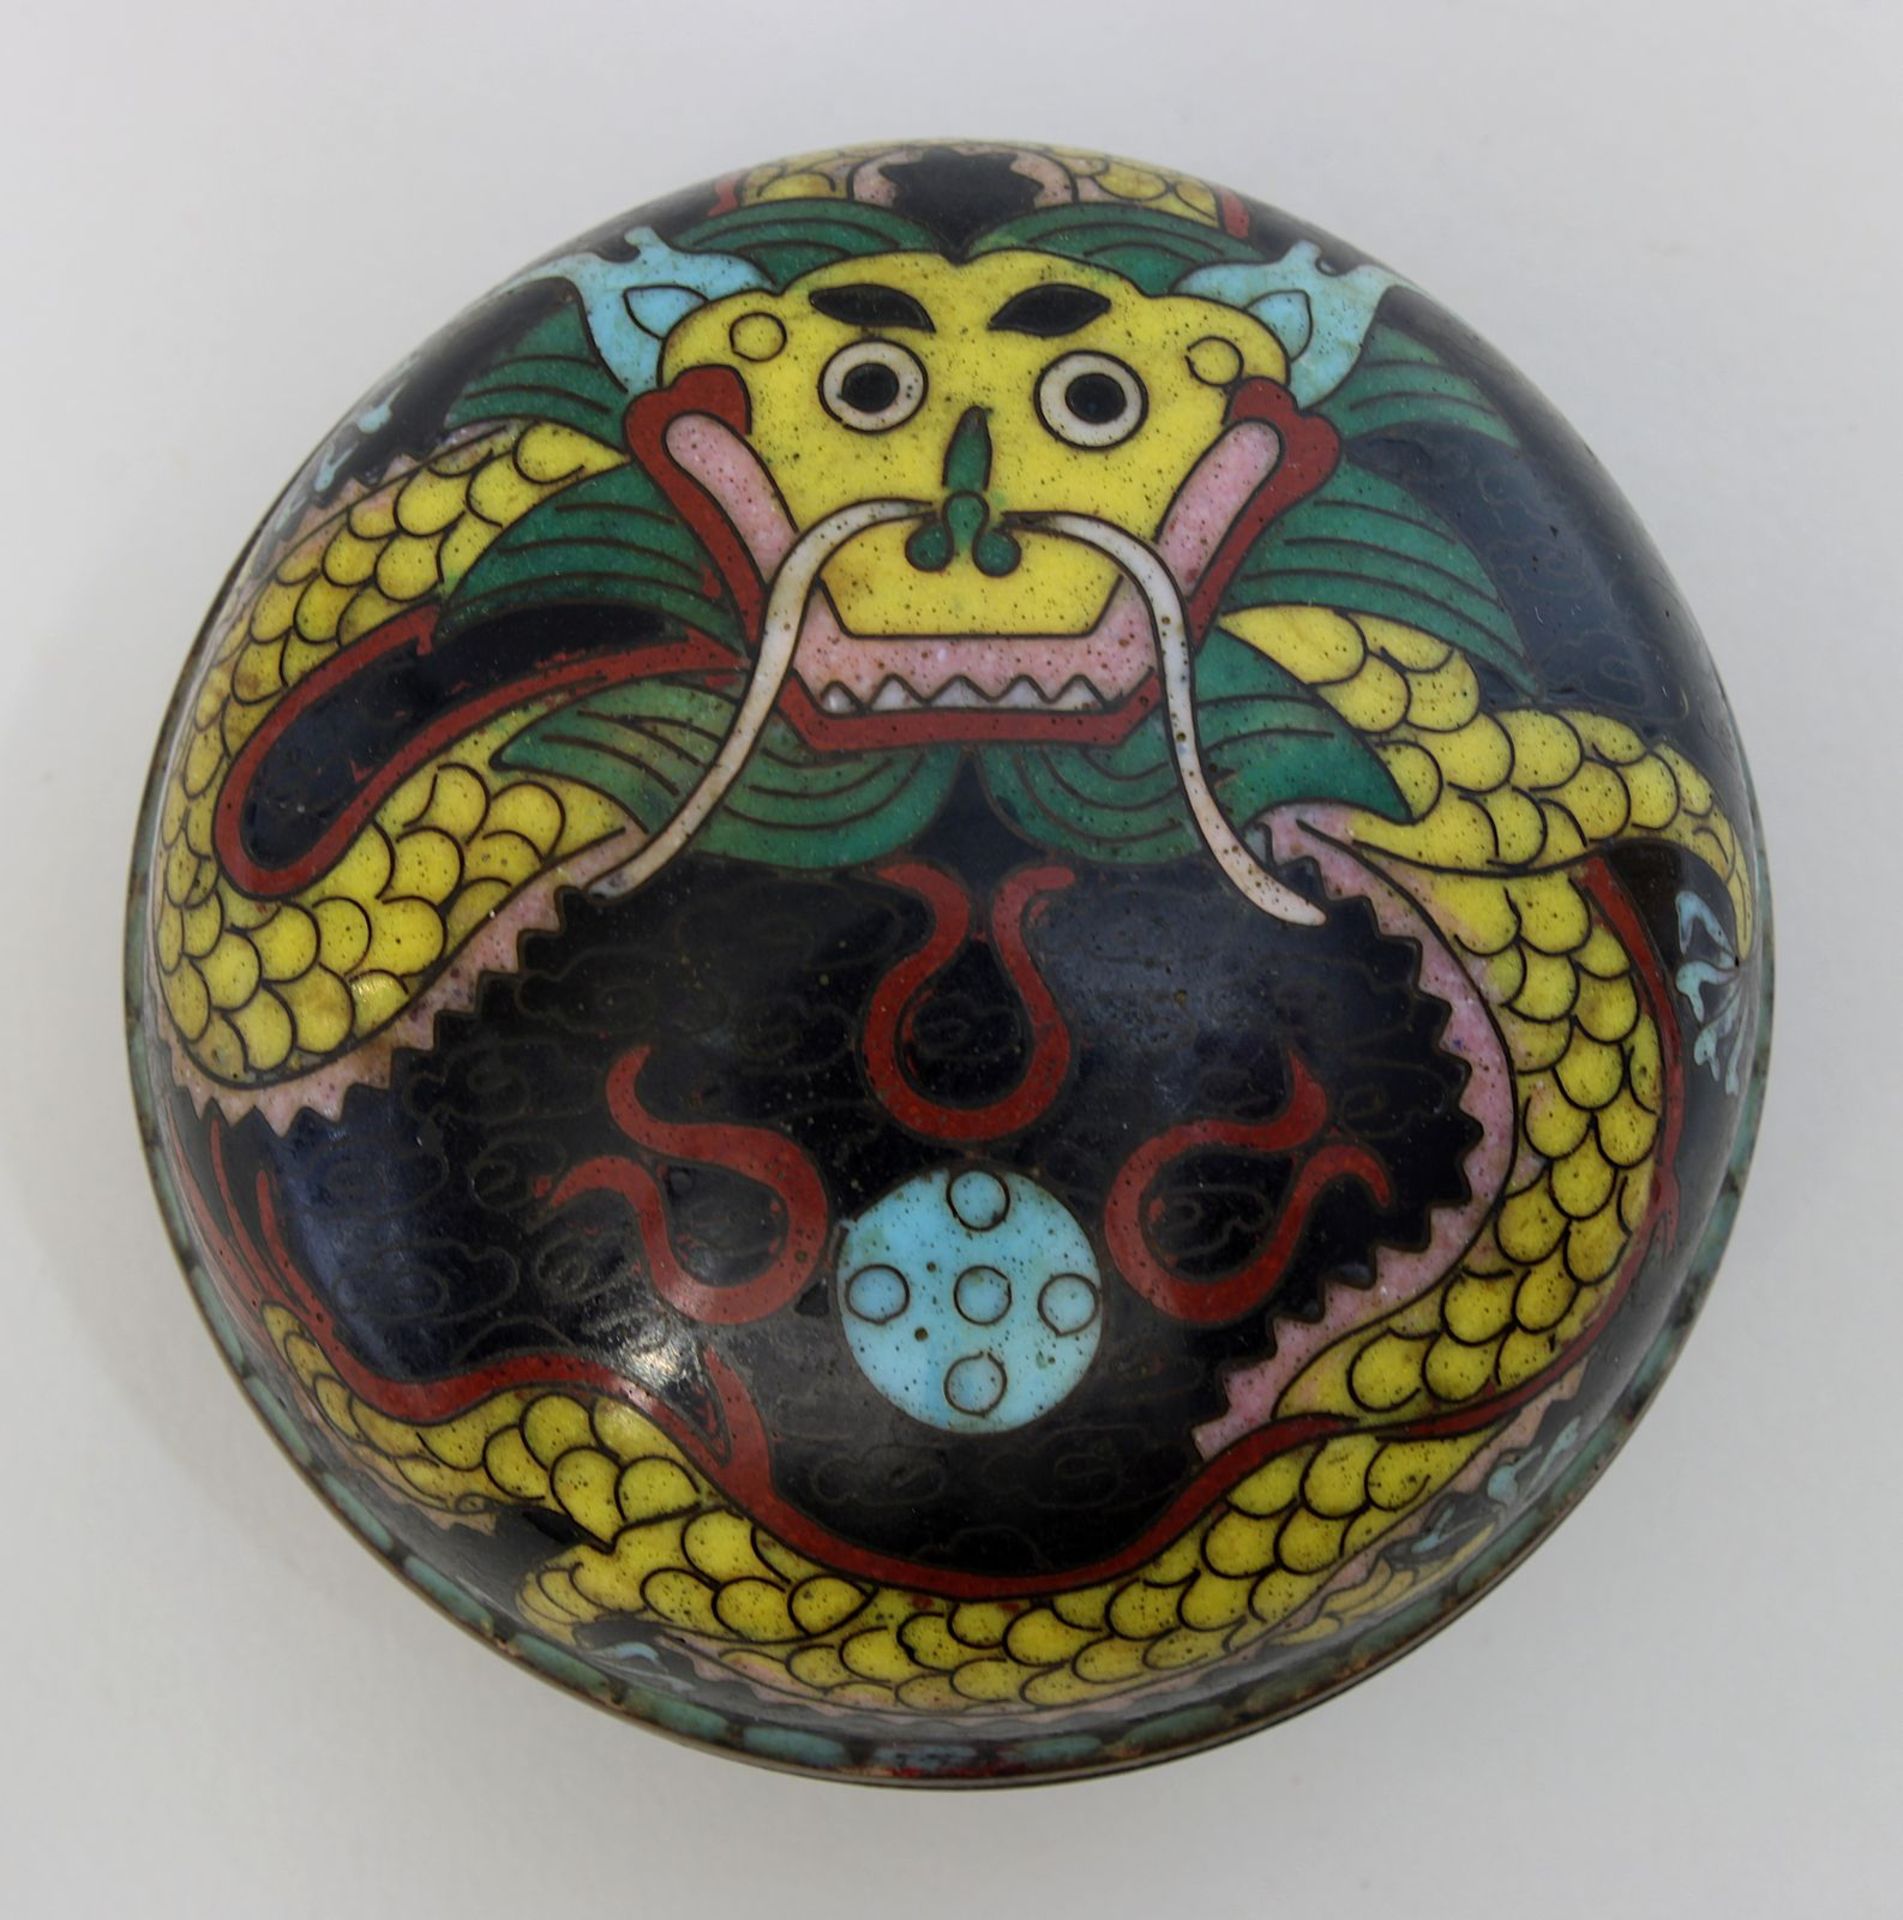 Cloisonnédose, wohl China Anfang 20. Jh., runde bauchige Form auf rundem Messingfuß, in farbigem